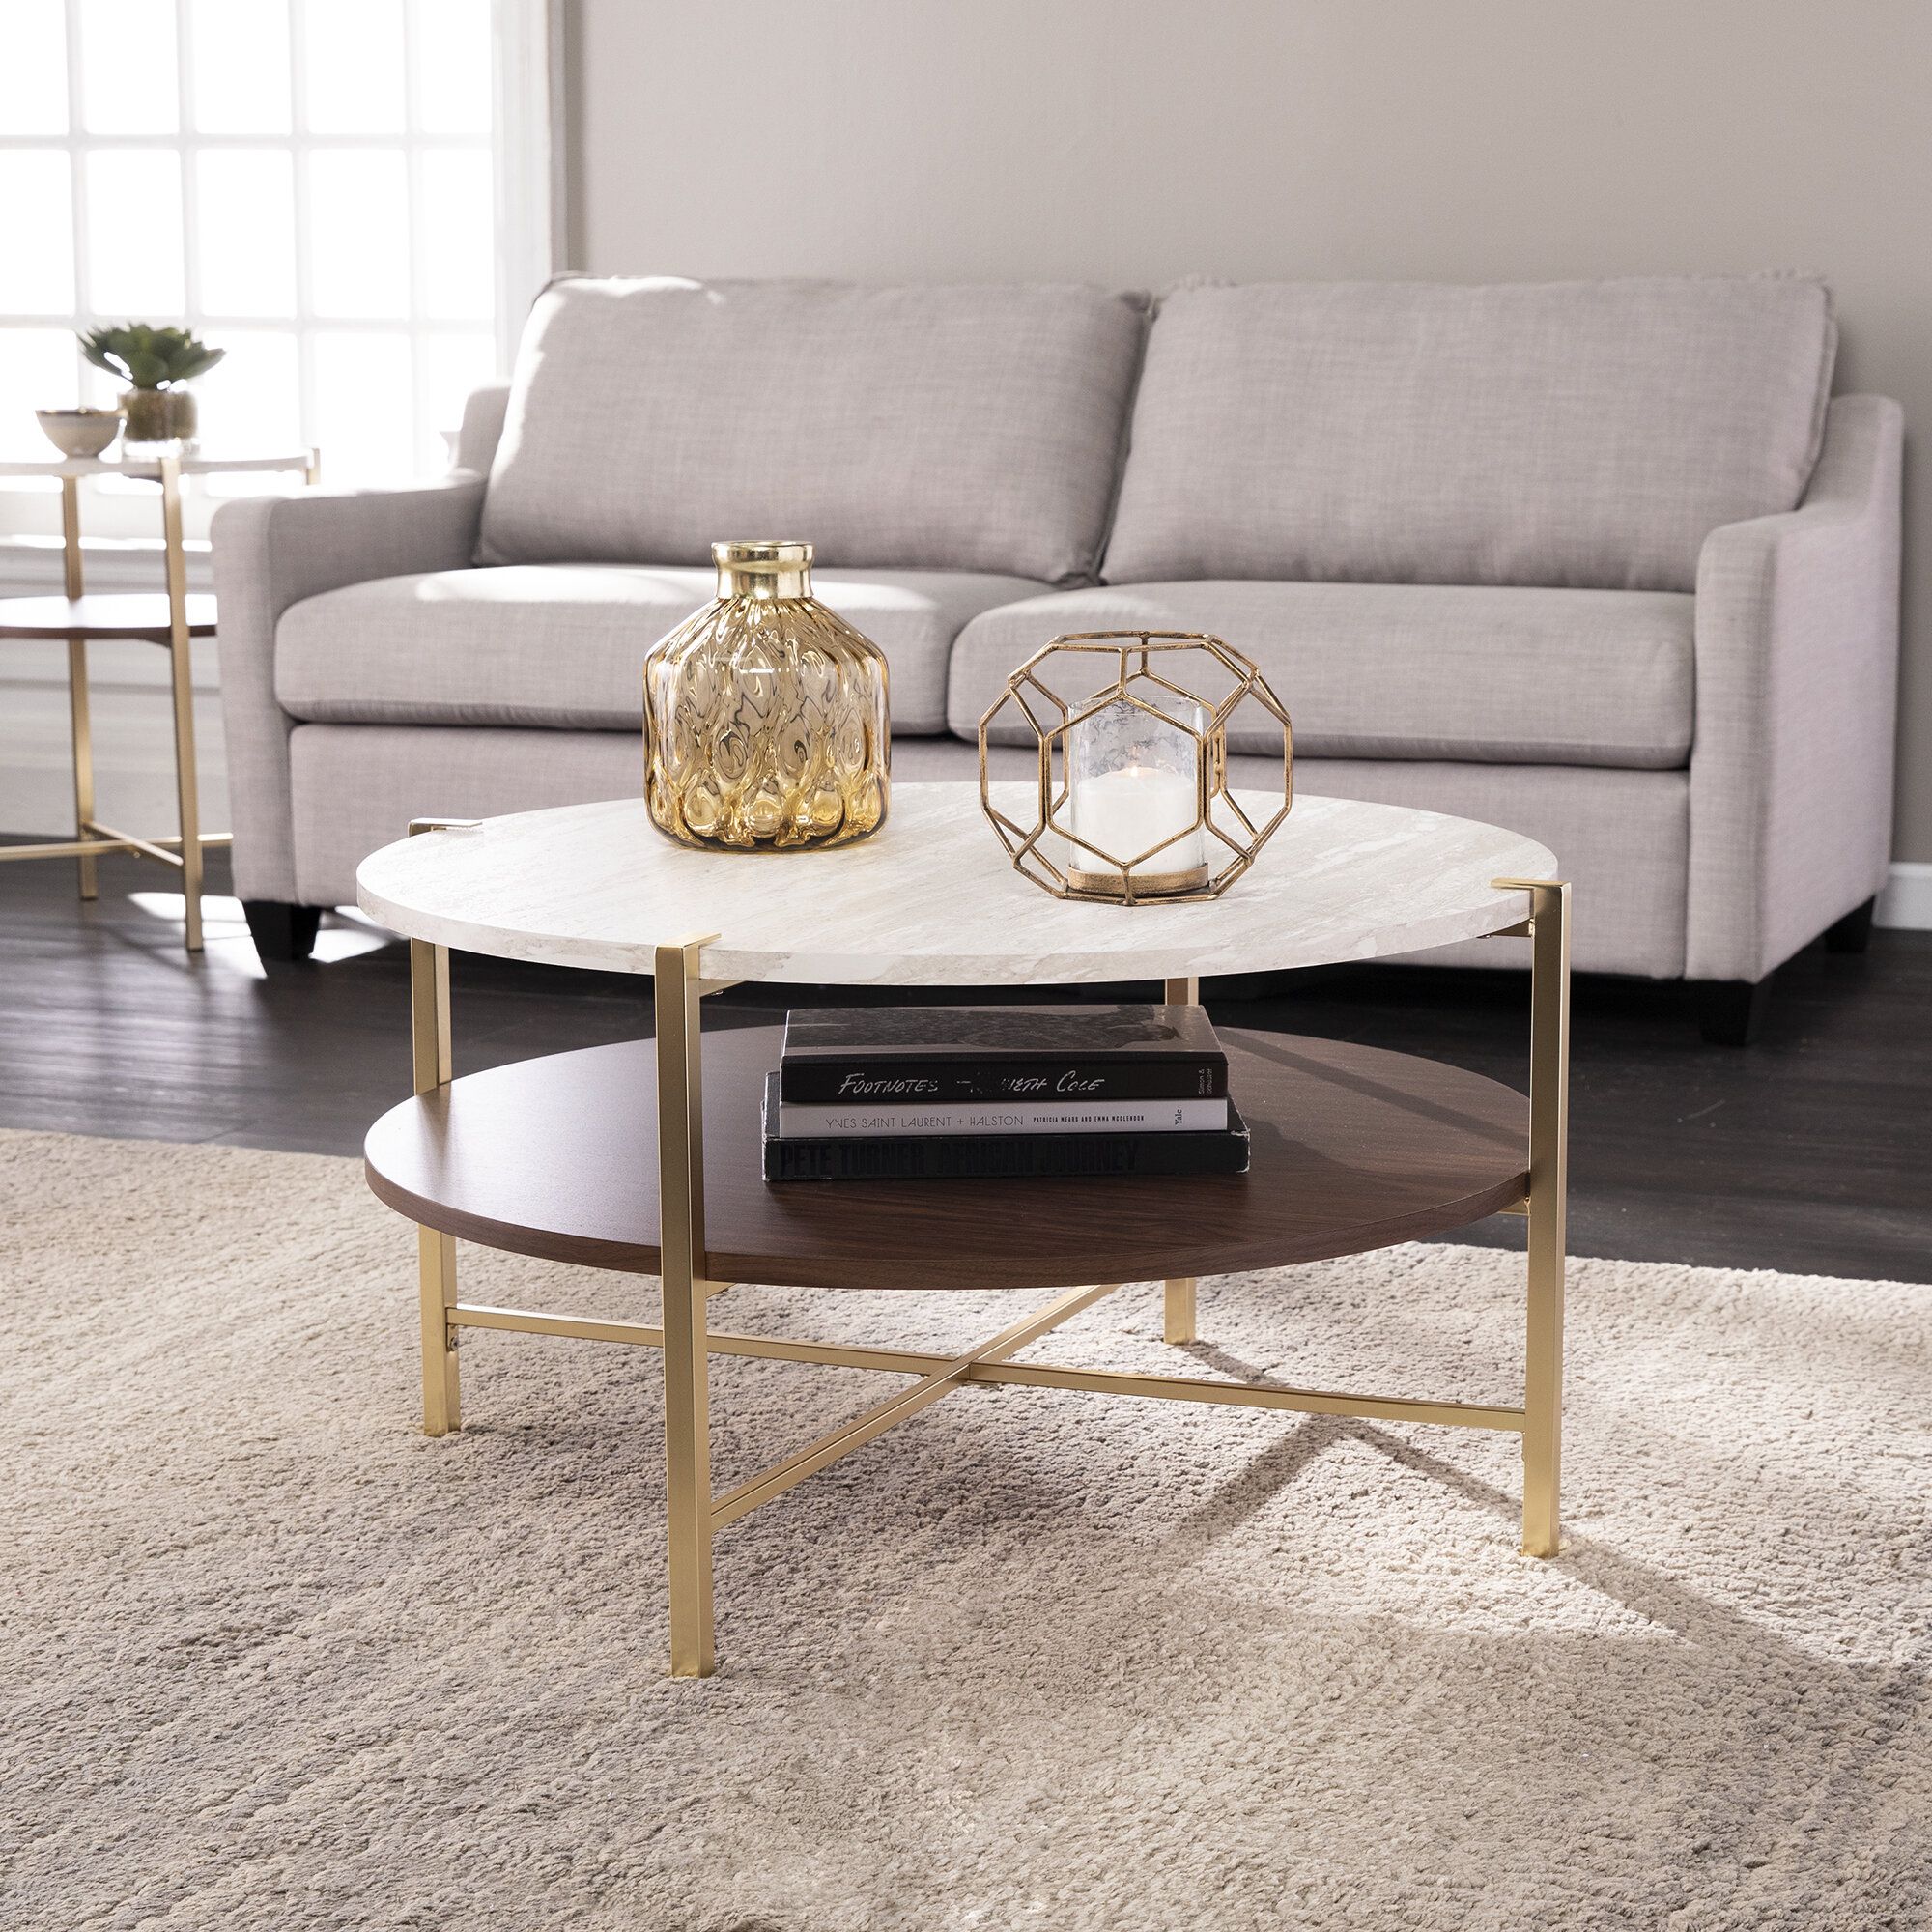 Willa Arlo Interiors Trosper Coffee Table With Storage & Reviews | Wayfair Pertaining To Faux Marble Top Coffee Tables (View 11 of 15)